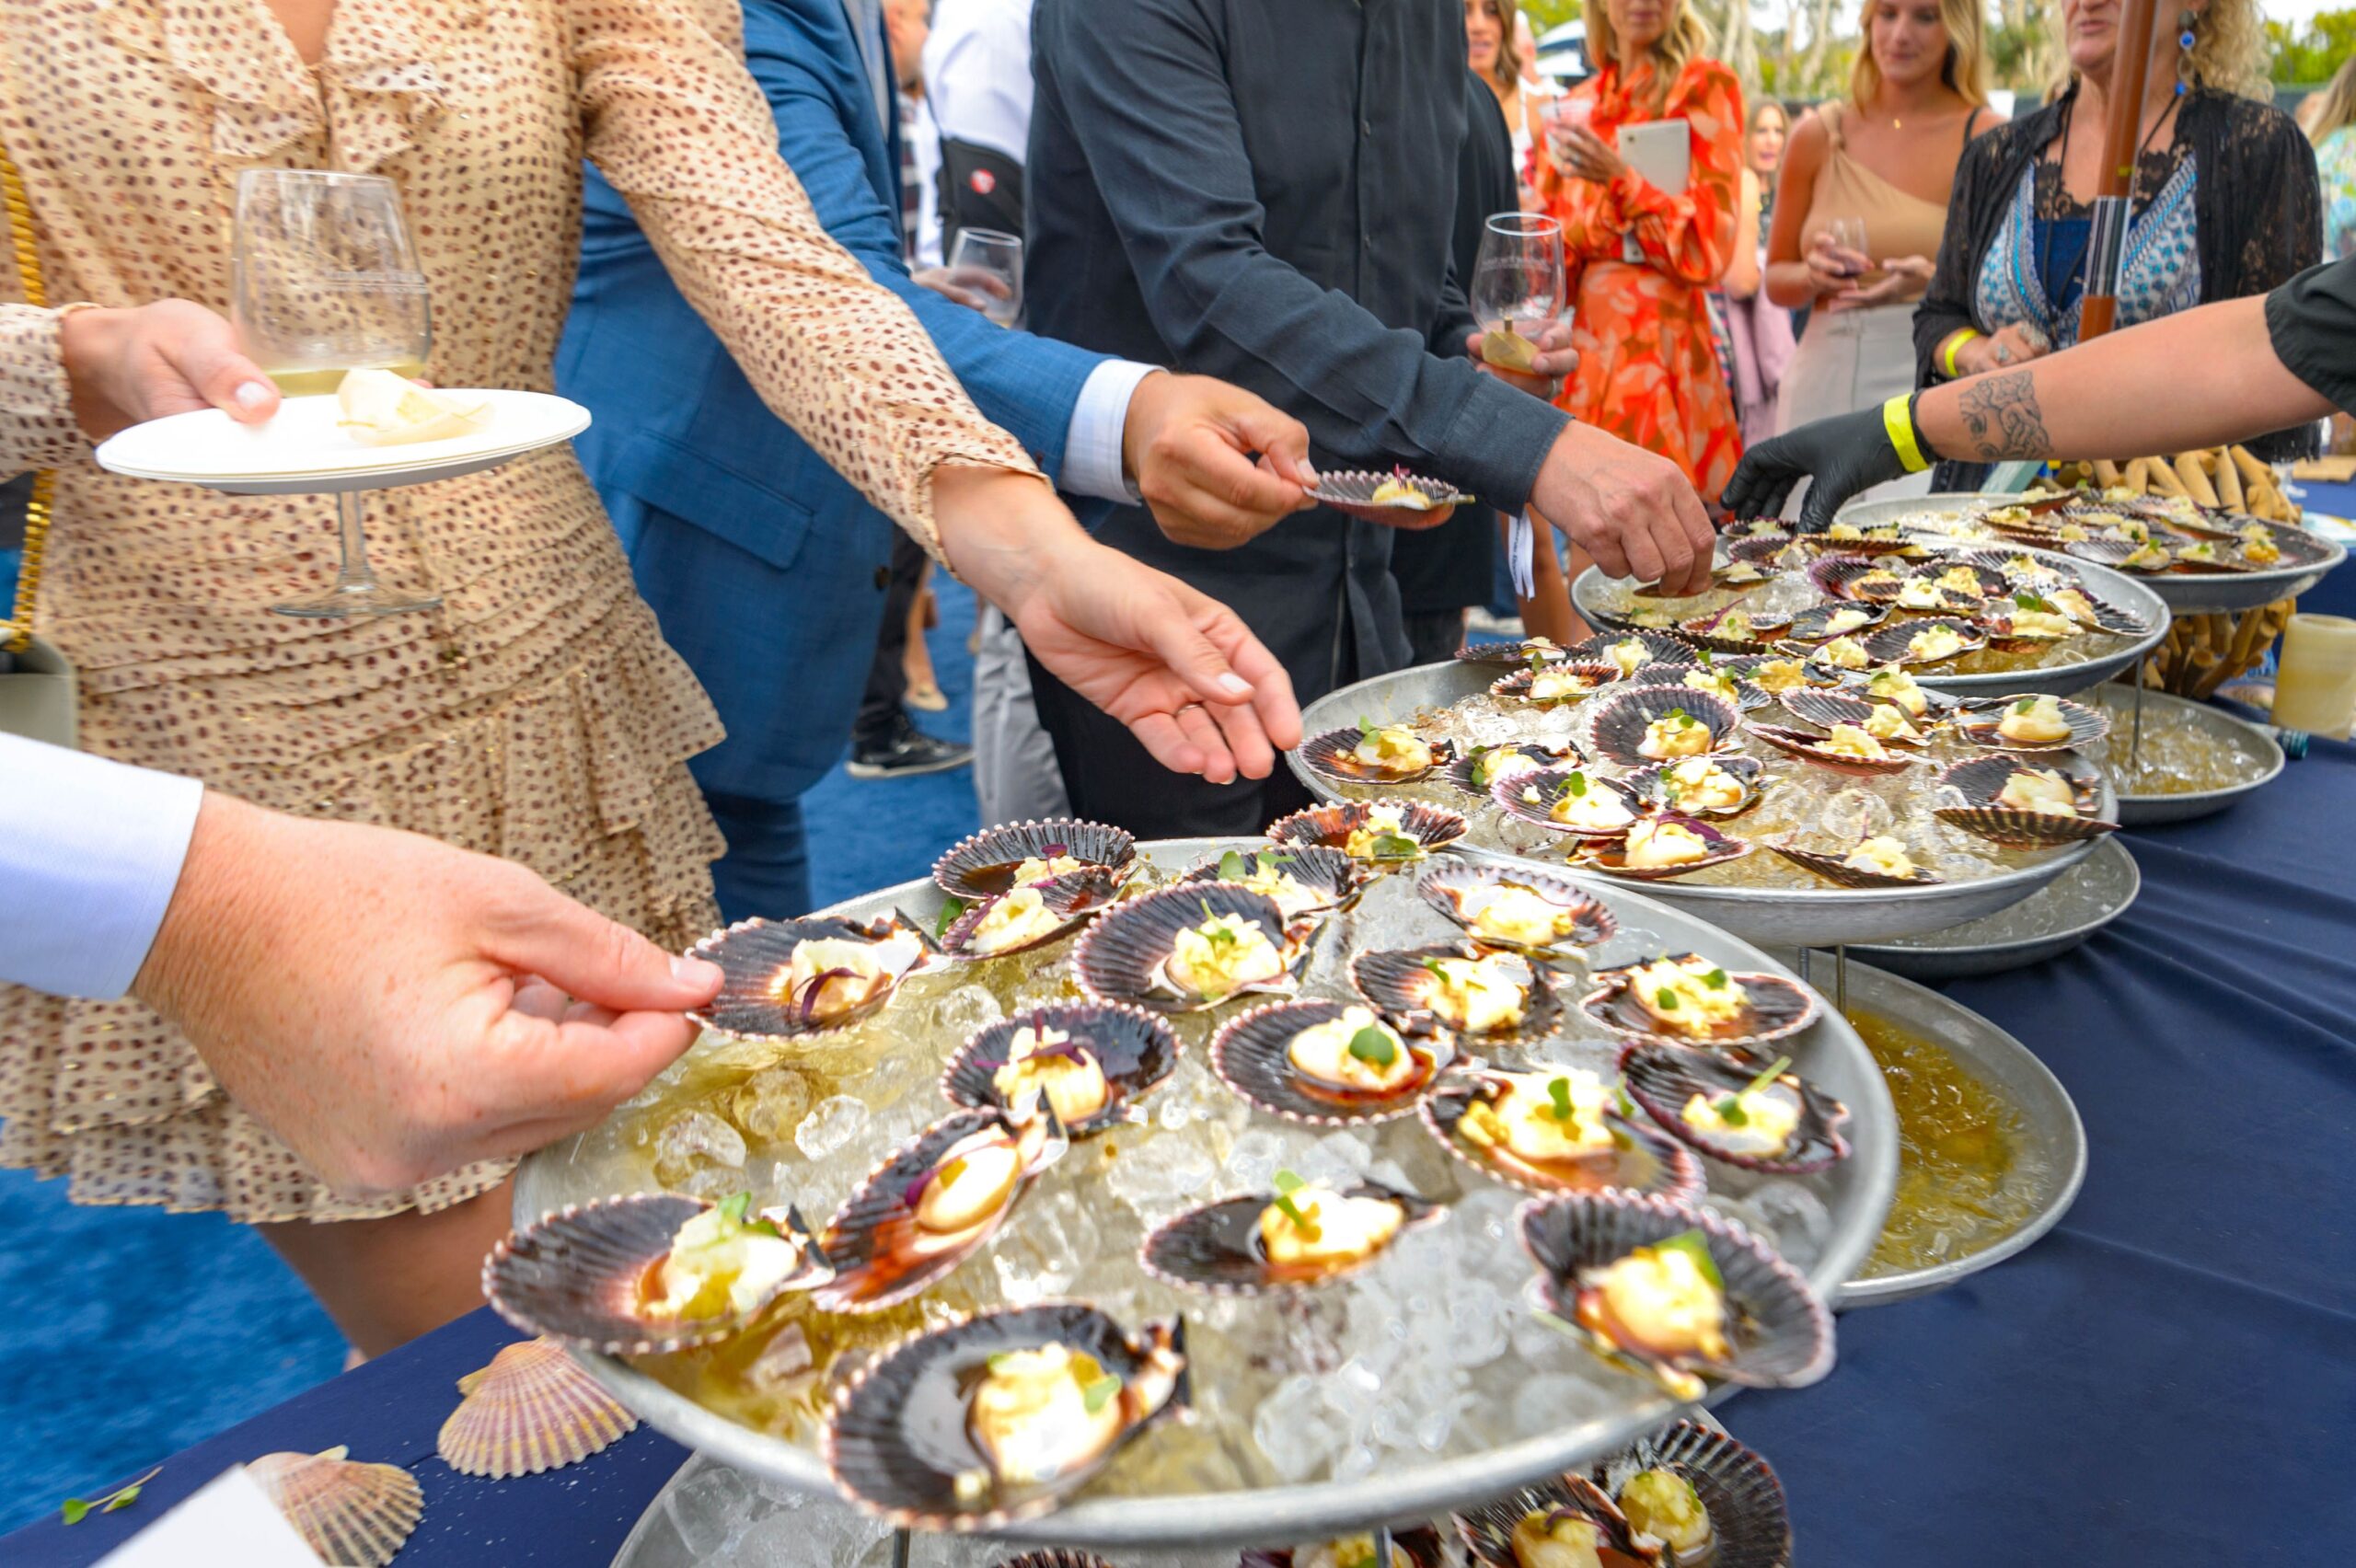 Manhattan Beach Wine Auction FoodWineCharity event on June 4th, 2022